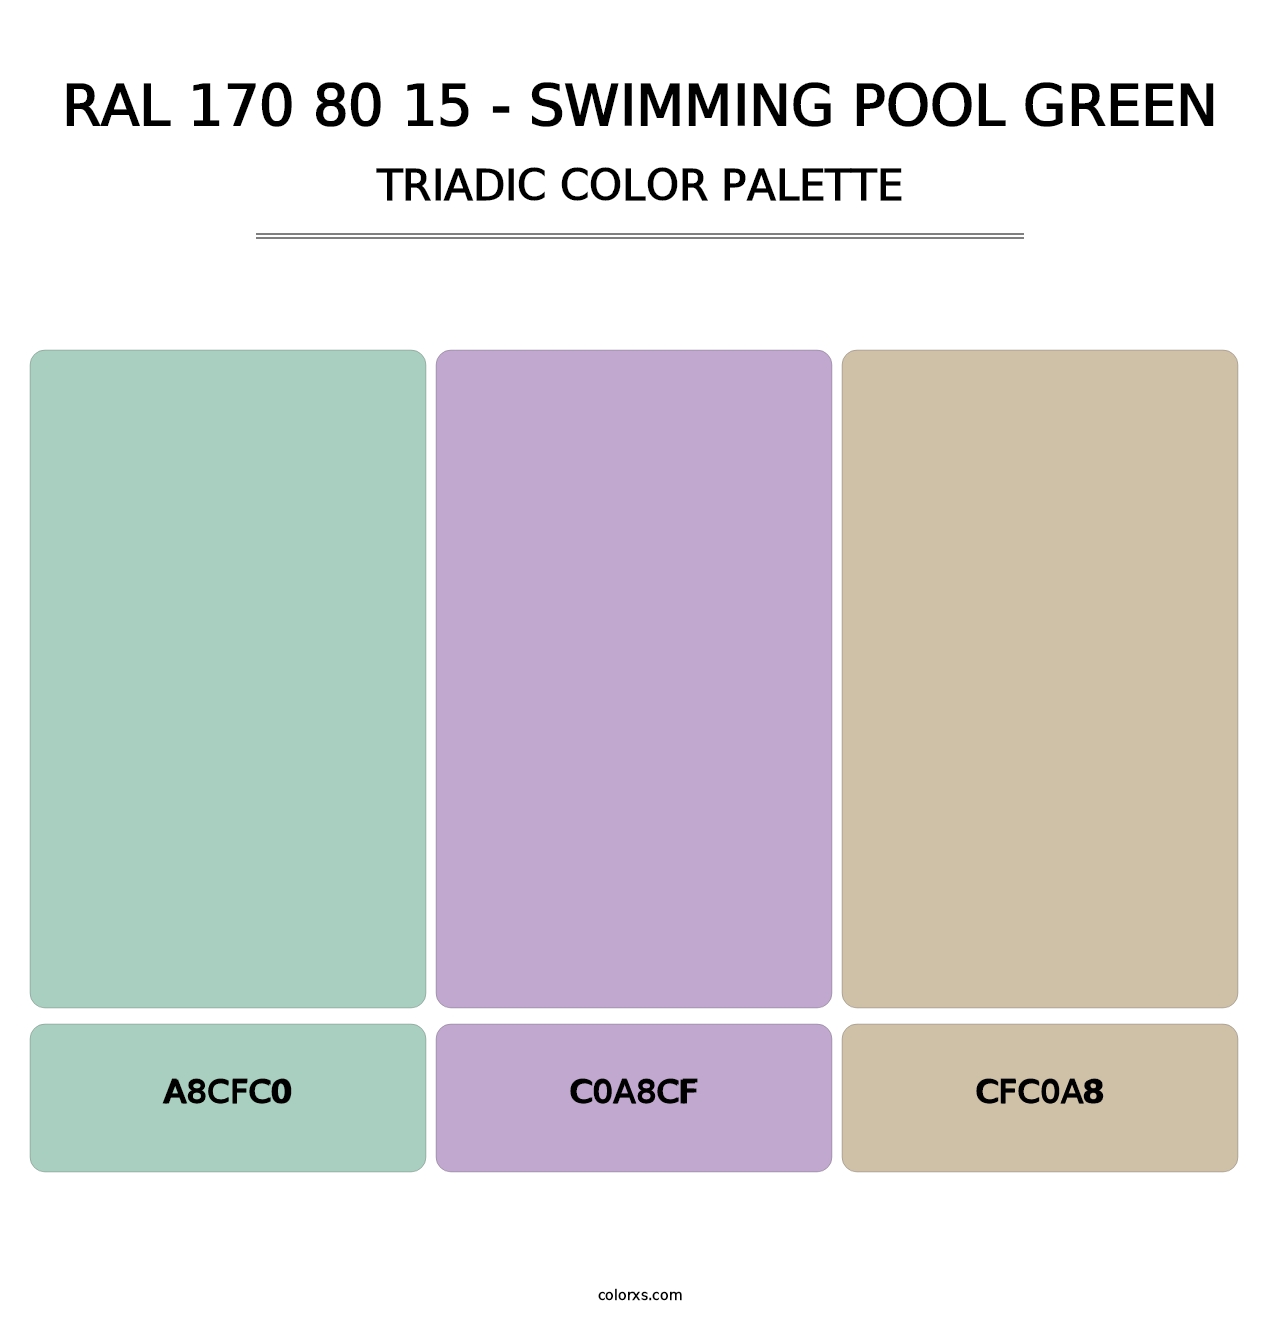 RAL 170 80 15 - Swimming Pool Green - Triadic Color Palette